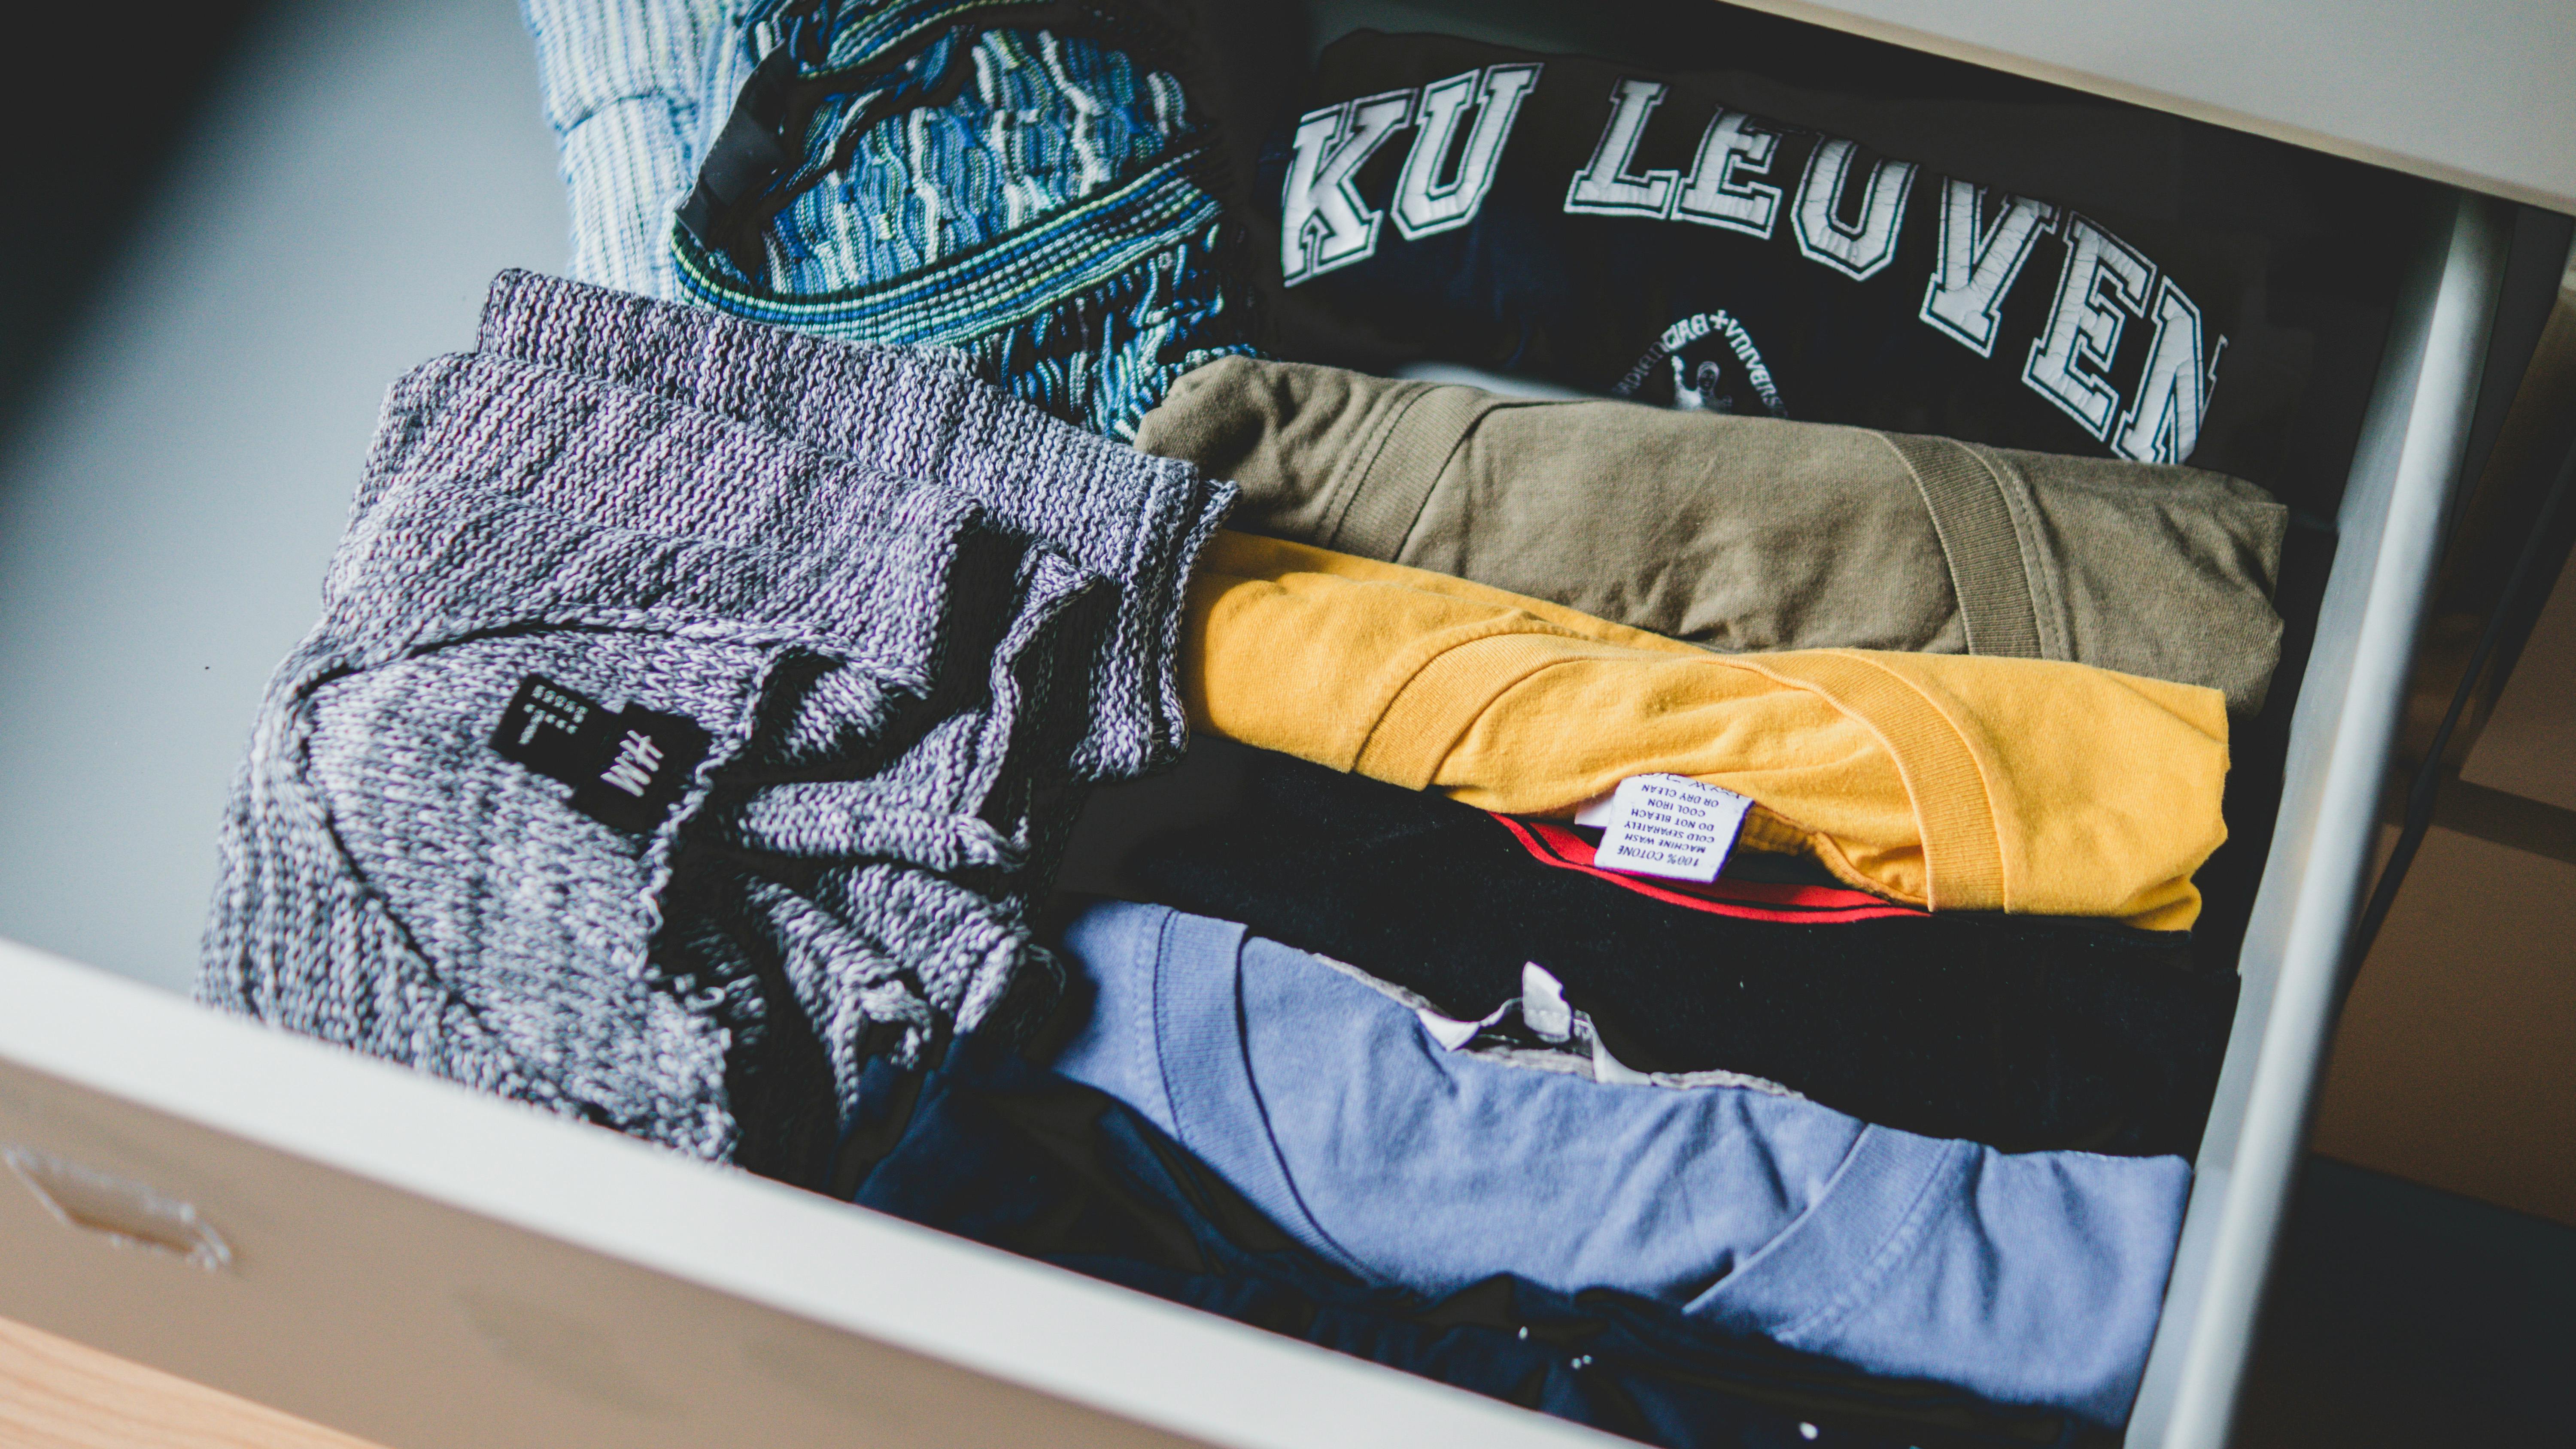 A drawer full of clothes | Source: Pexels